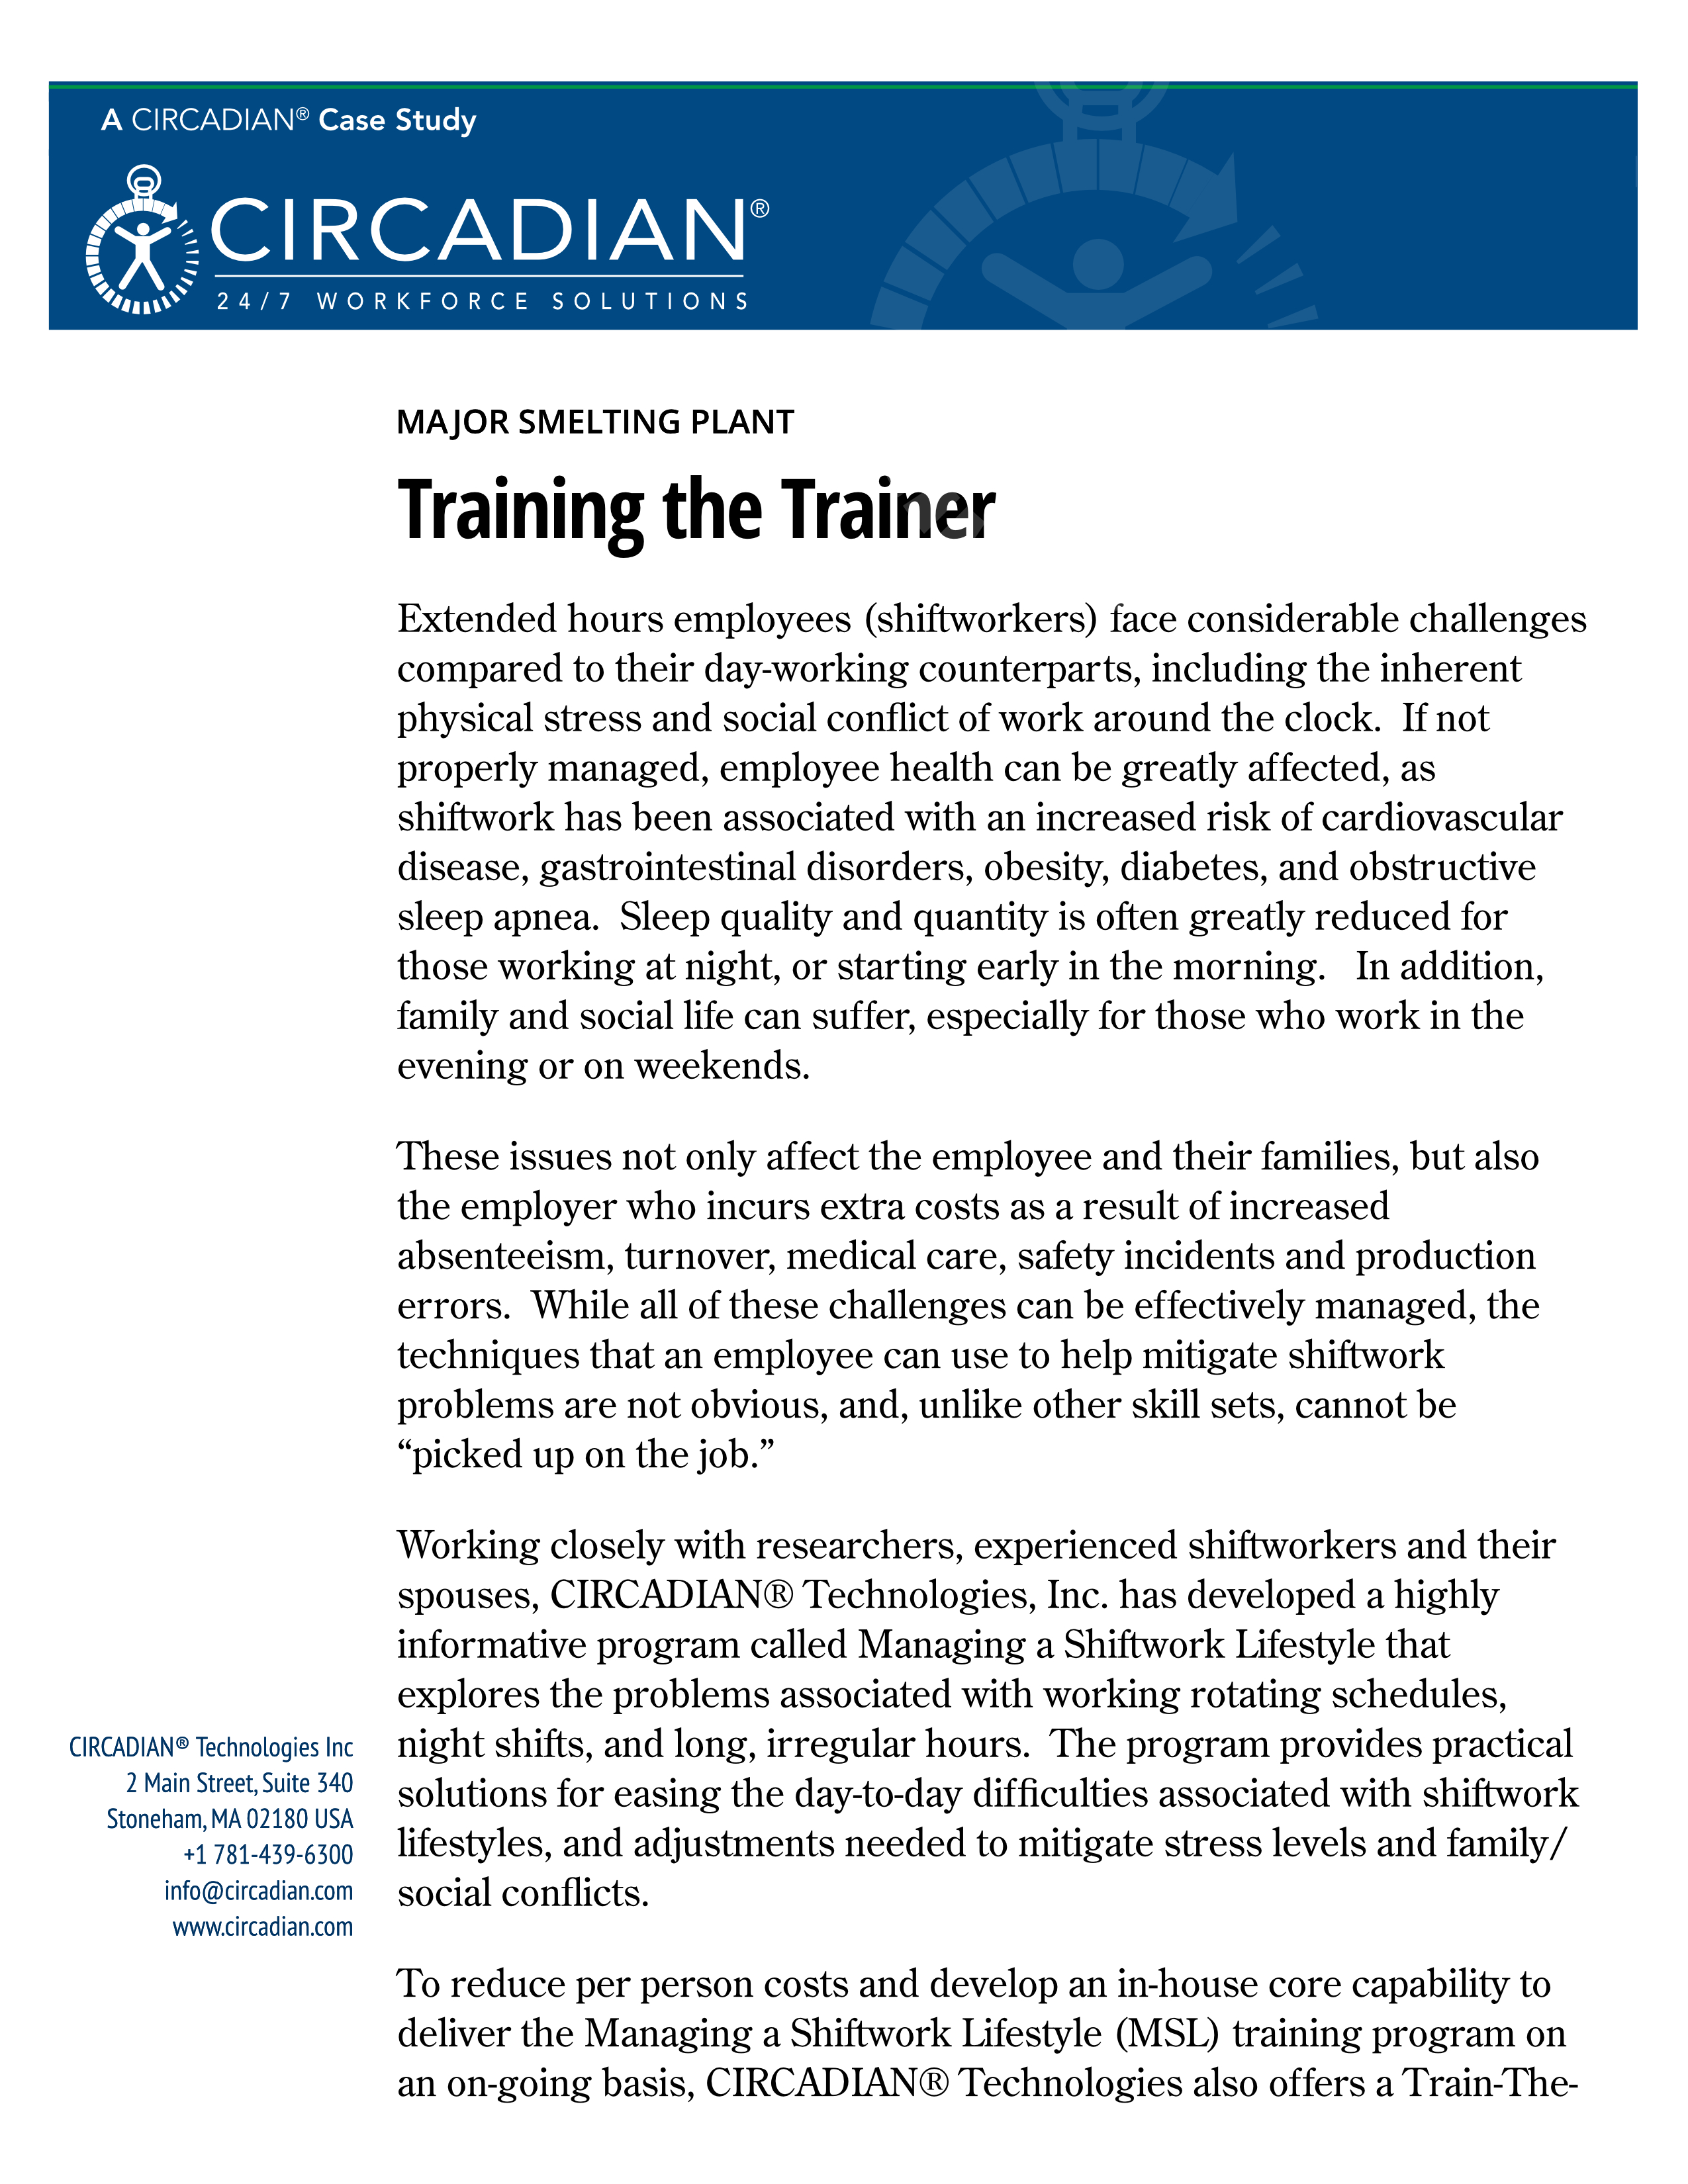 case-study-training-the-trainer